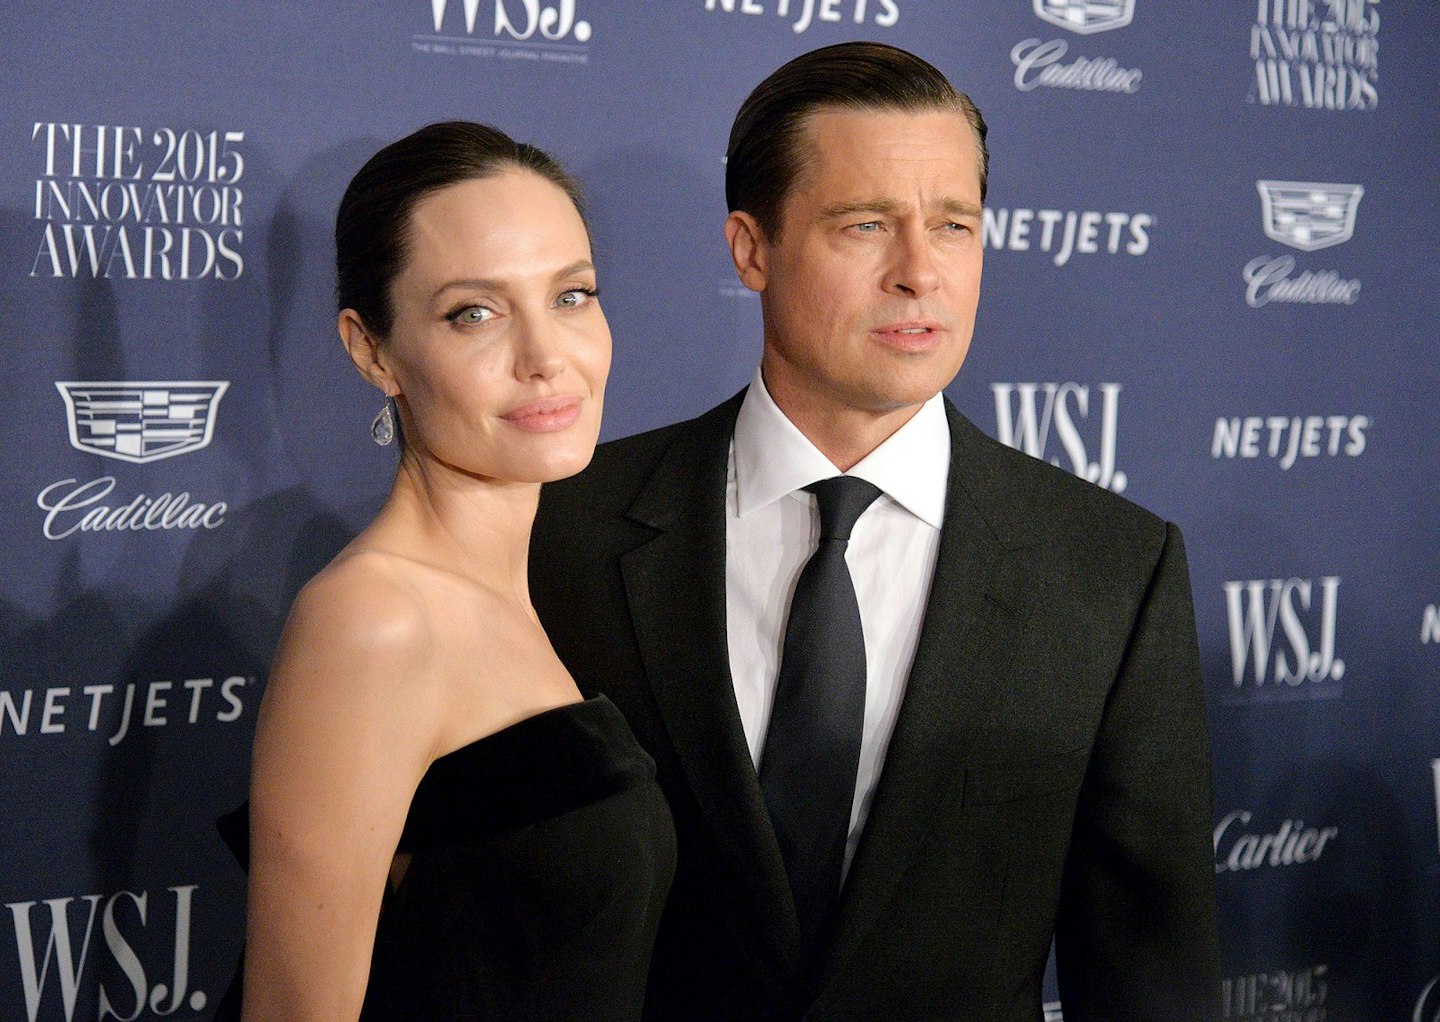 Angelina Jolie says Brad Pitt was violent with their children on a